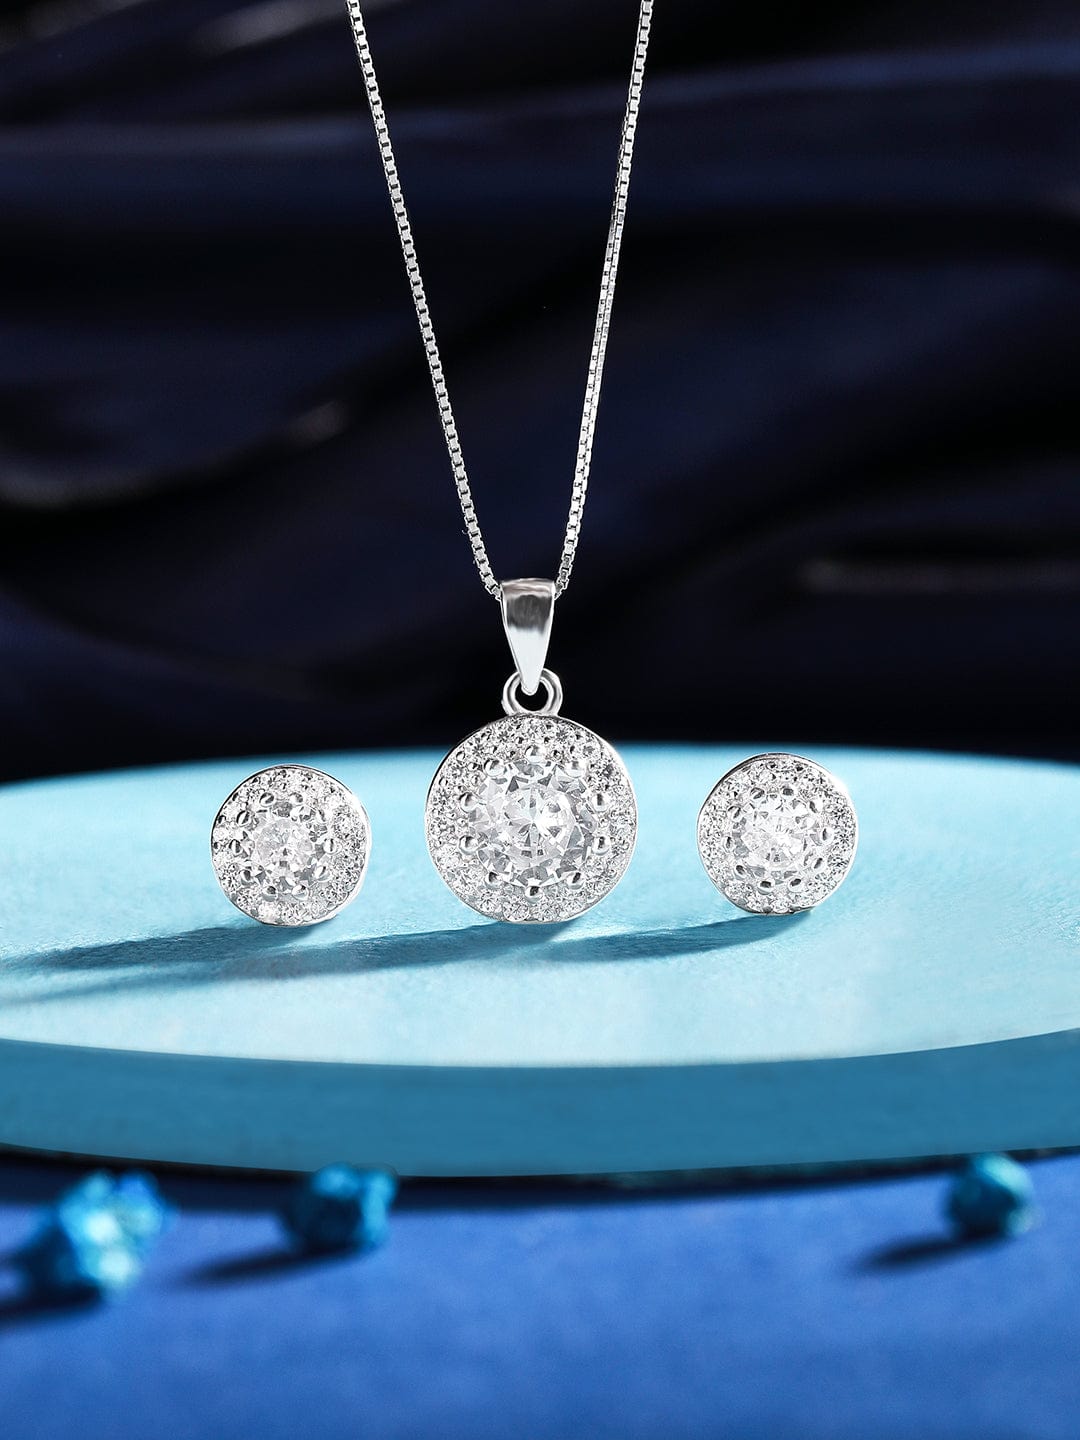 The Circle Of The Sparkles - Necklace Set Necklace Set